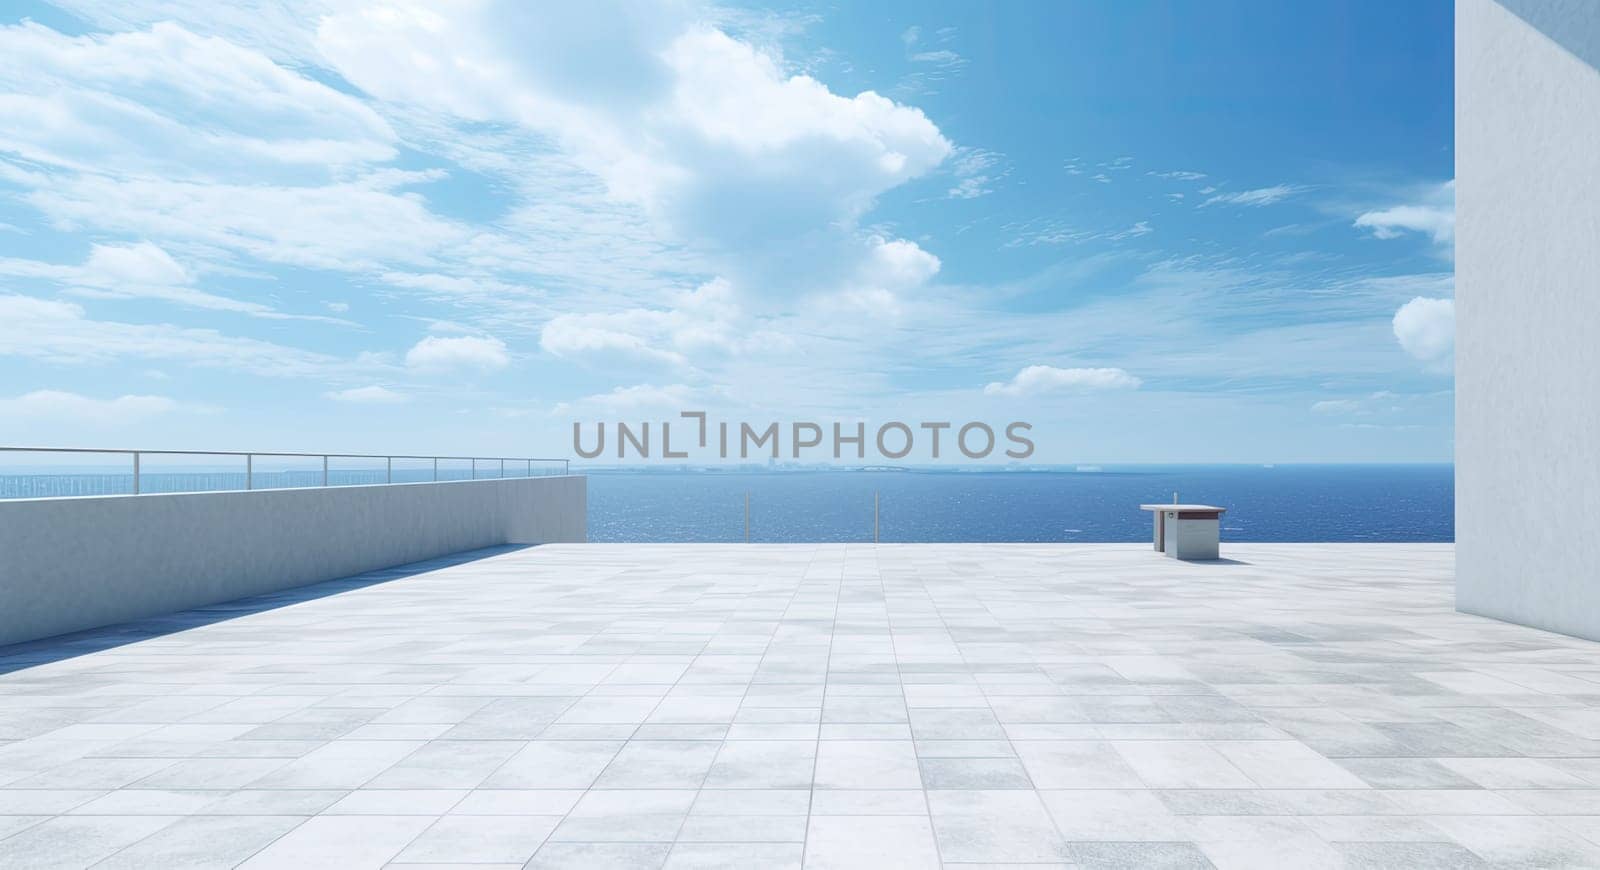 Concrete floor of the promenade and sea views. Beautiful background